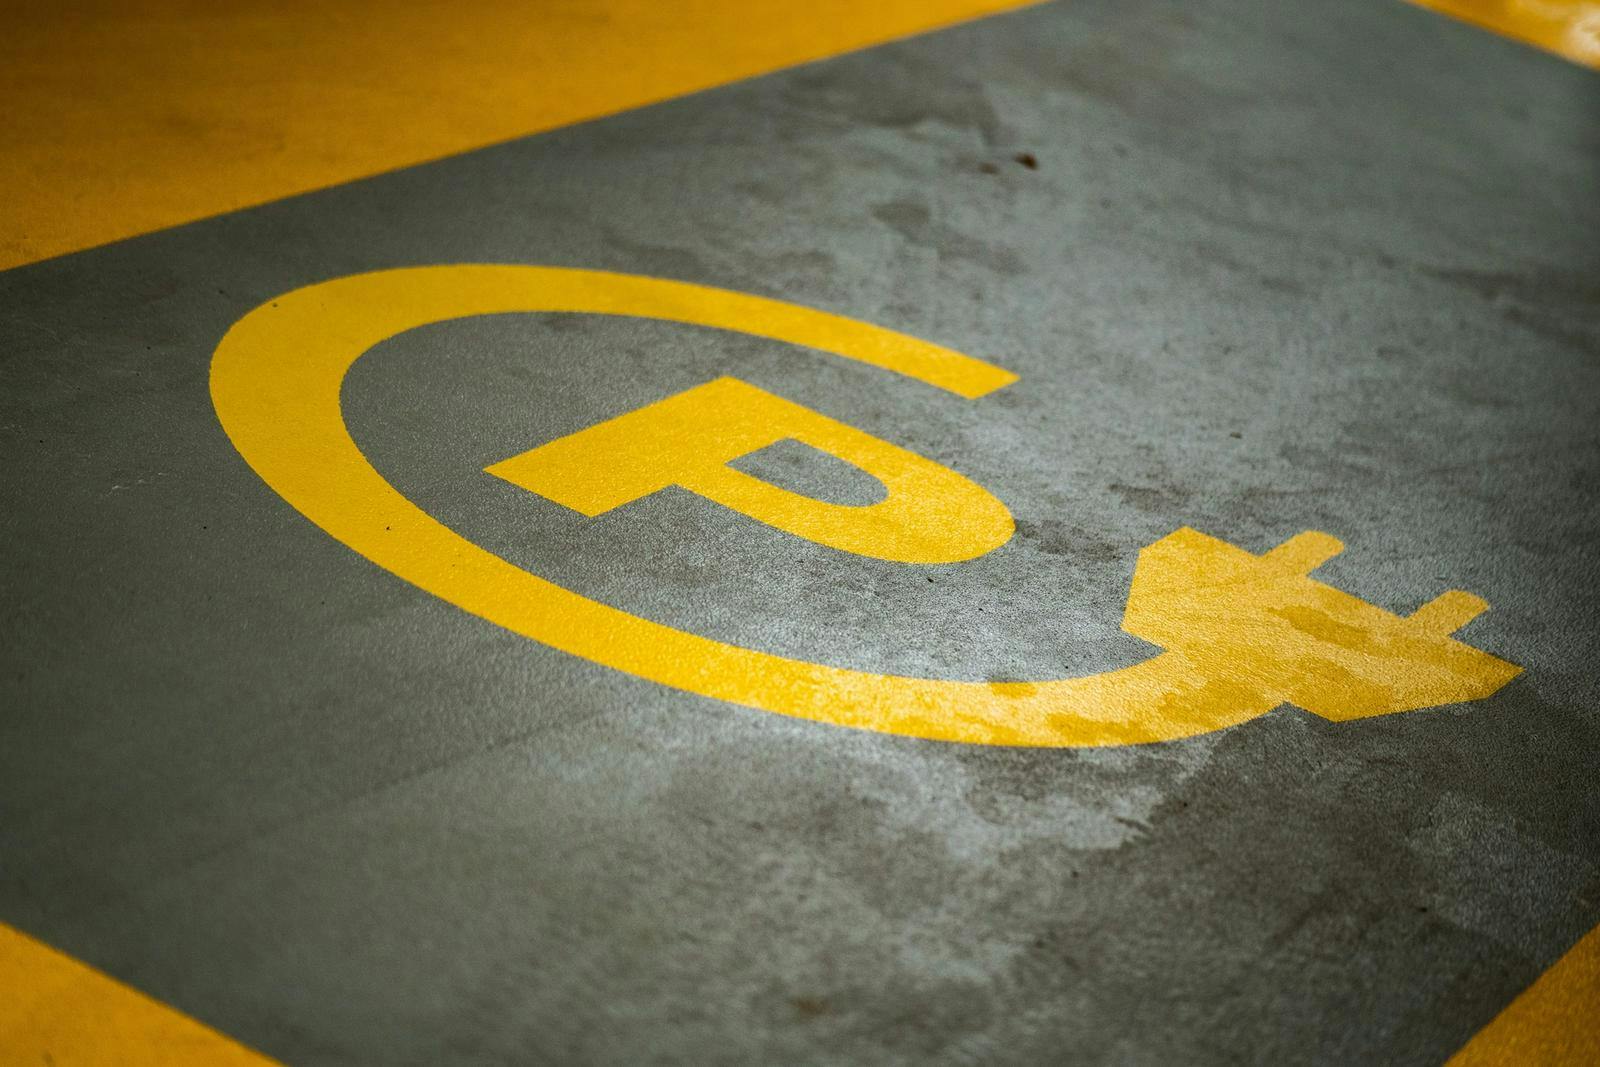 Parking spot for electric vehicles